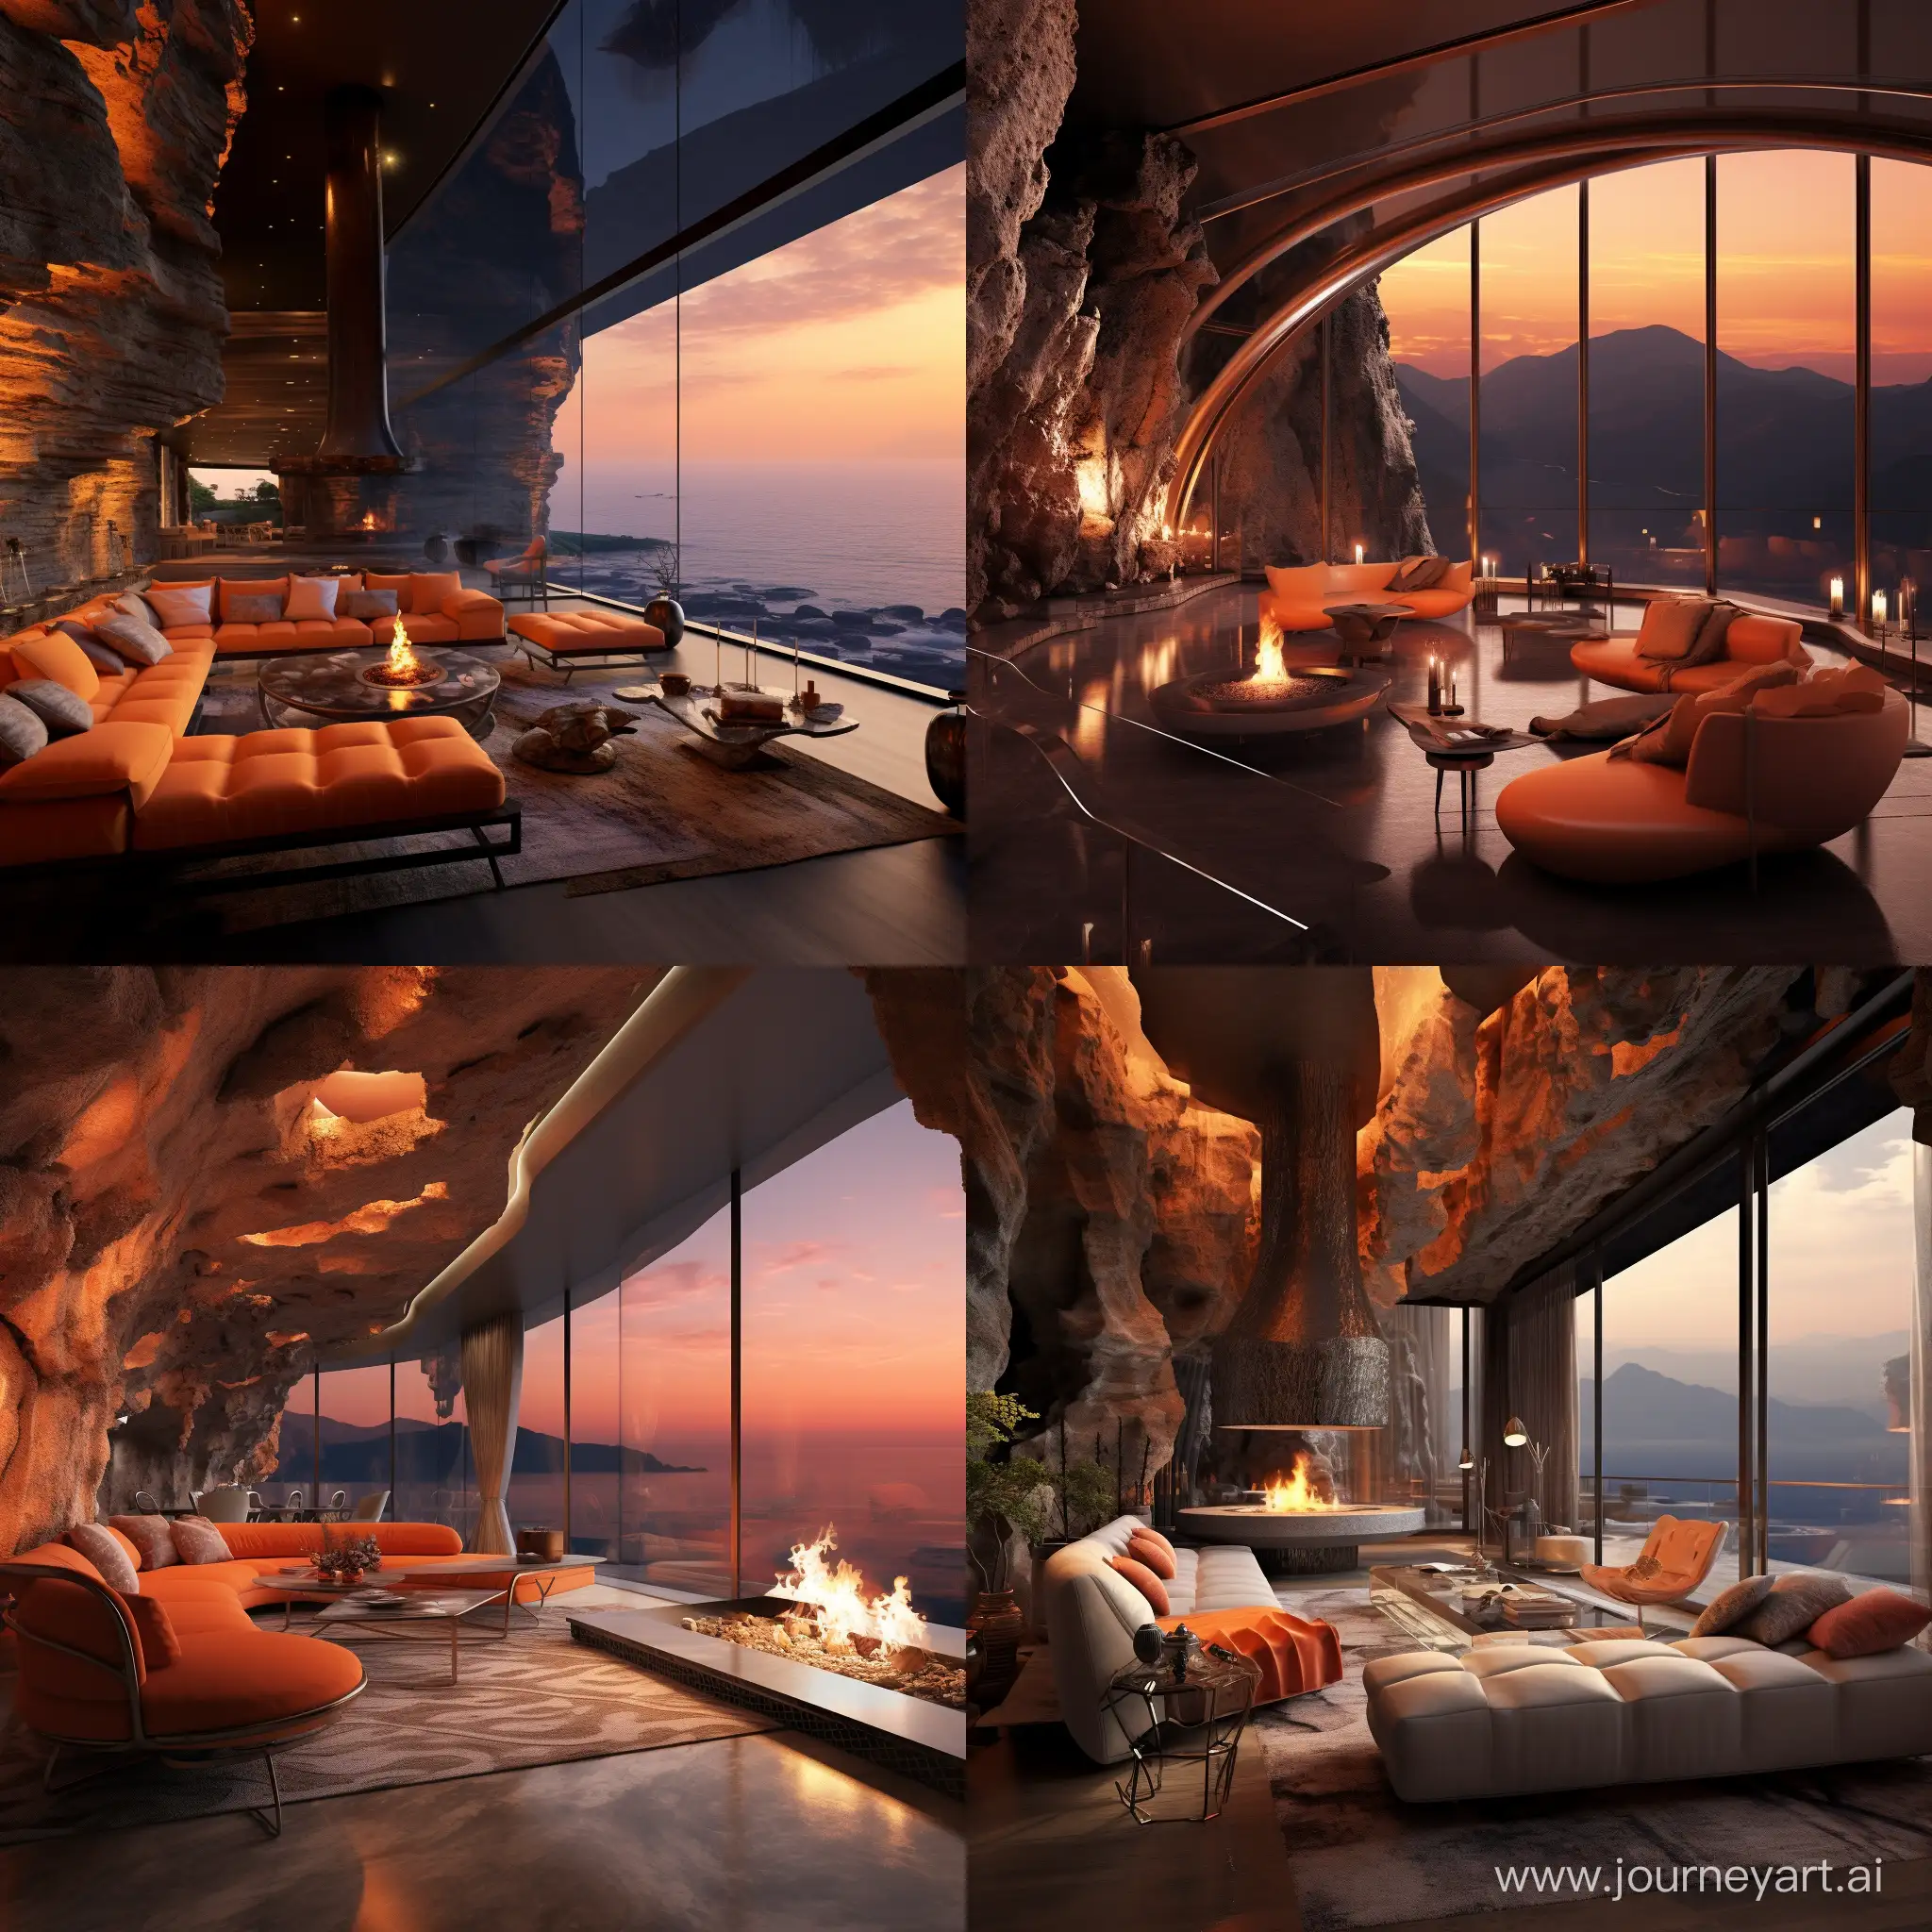  neo-cosmic living room built on the side of a cliff, interior design, an air of loneliness and luxury, a warm orange modern ambiance, double length floor to celling windows, a large and long fire place to the side of the room
